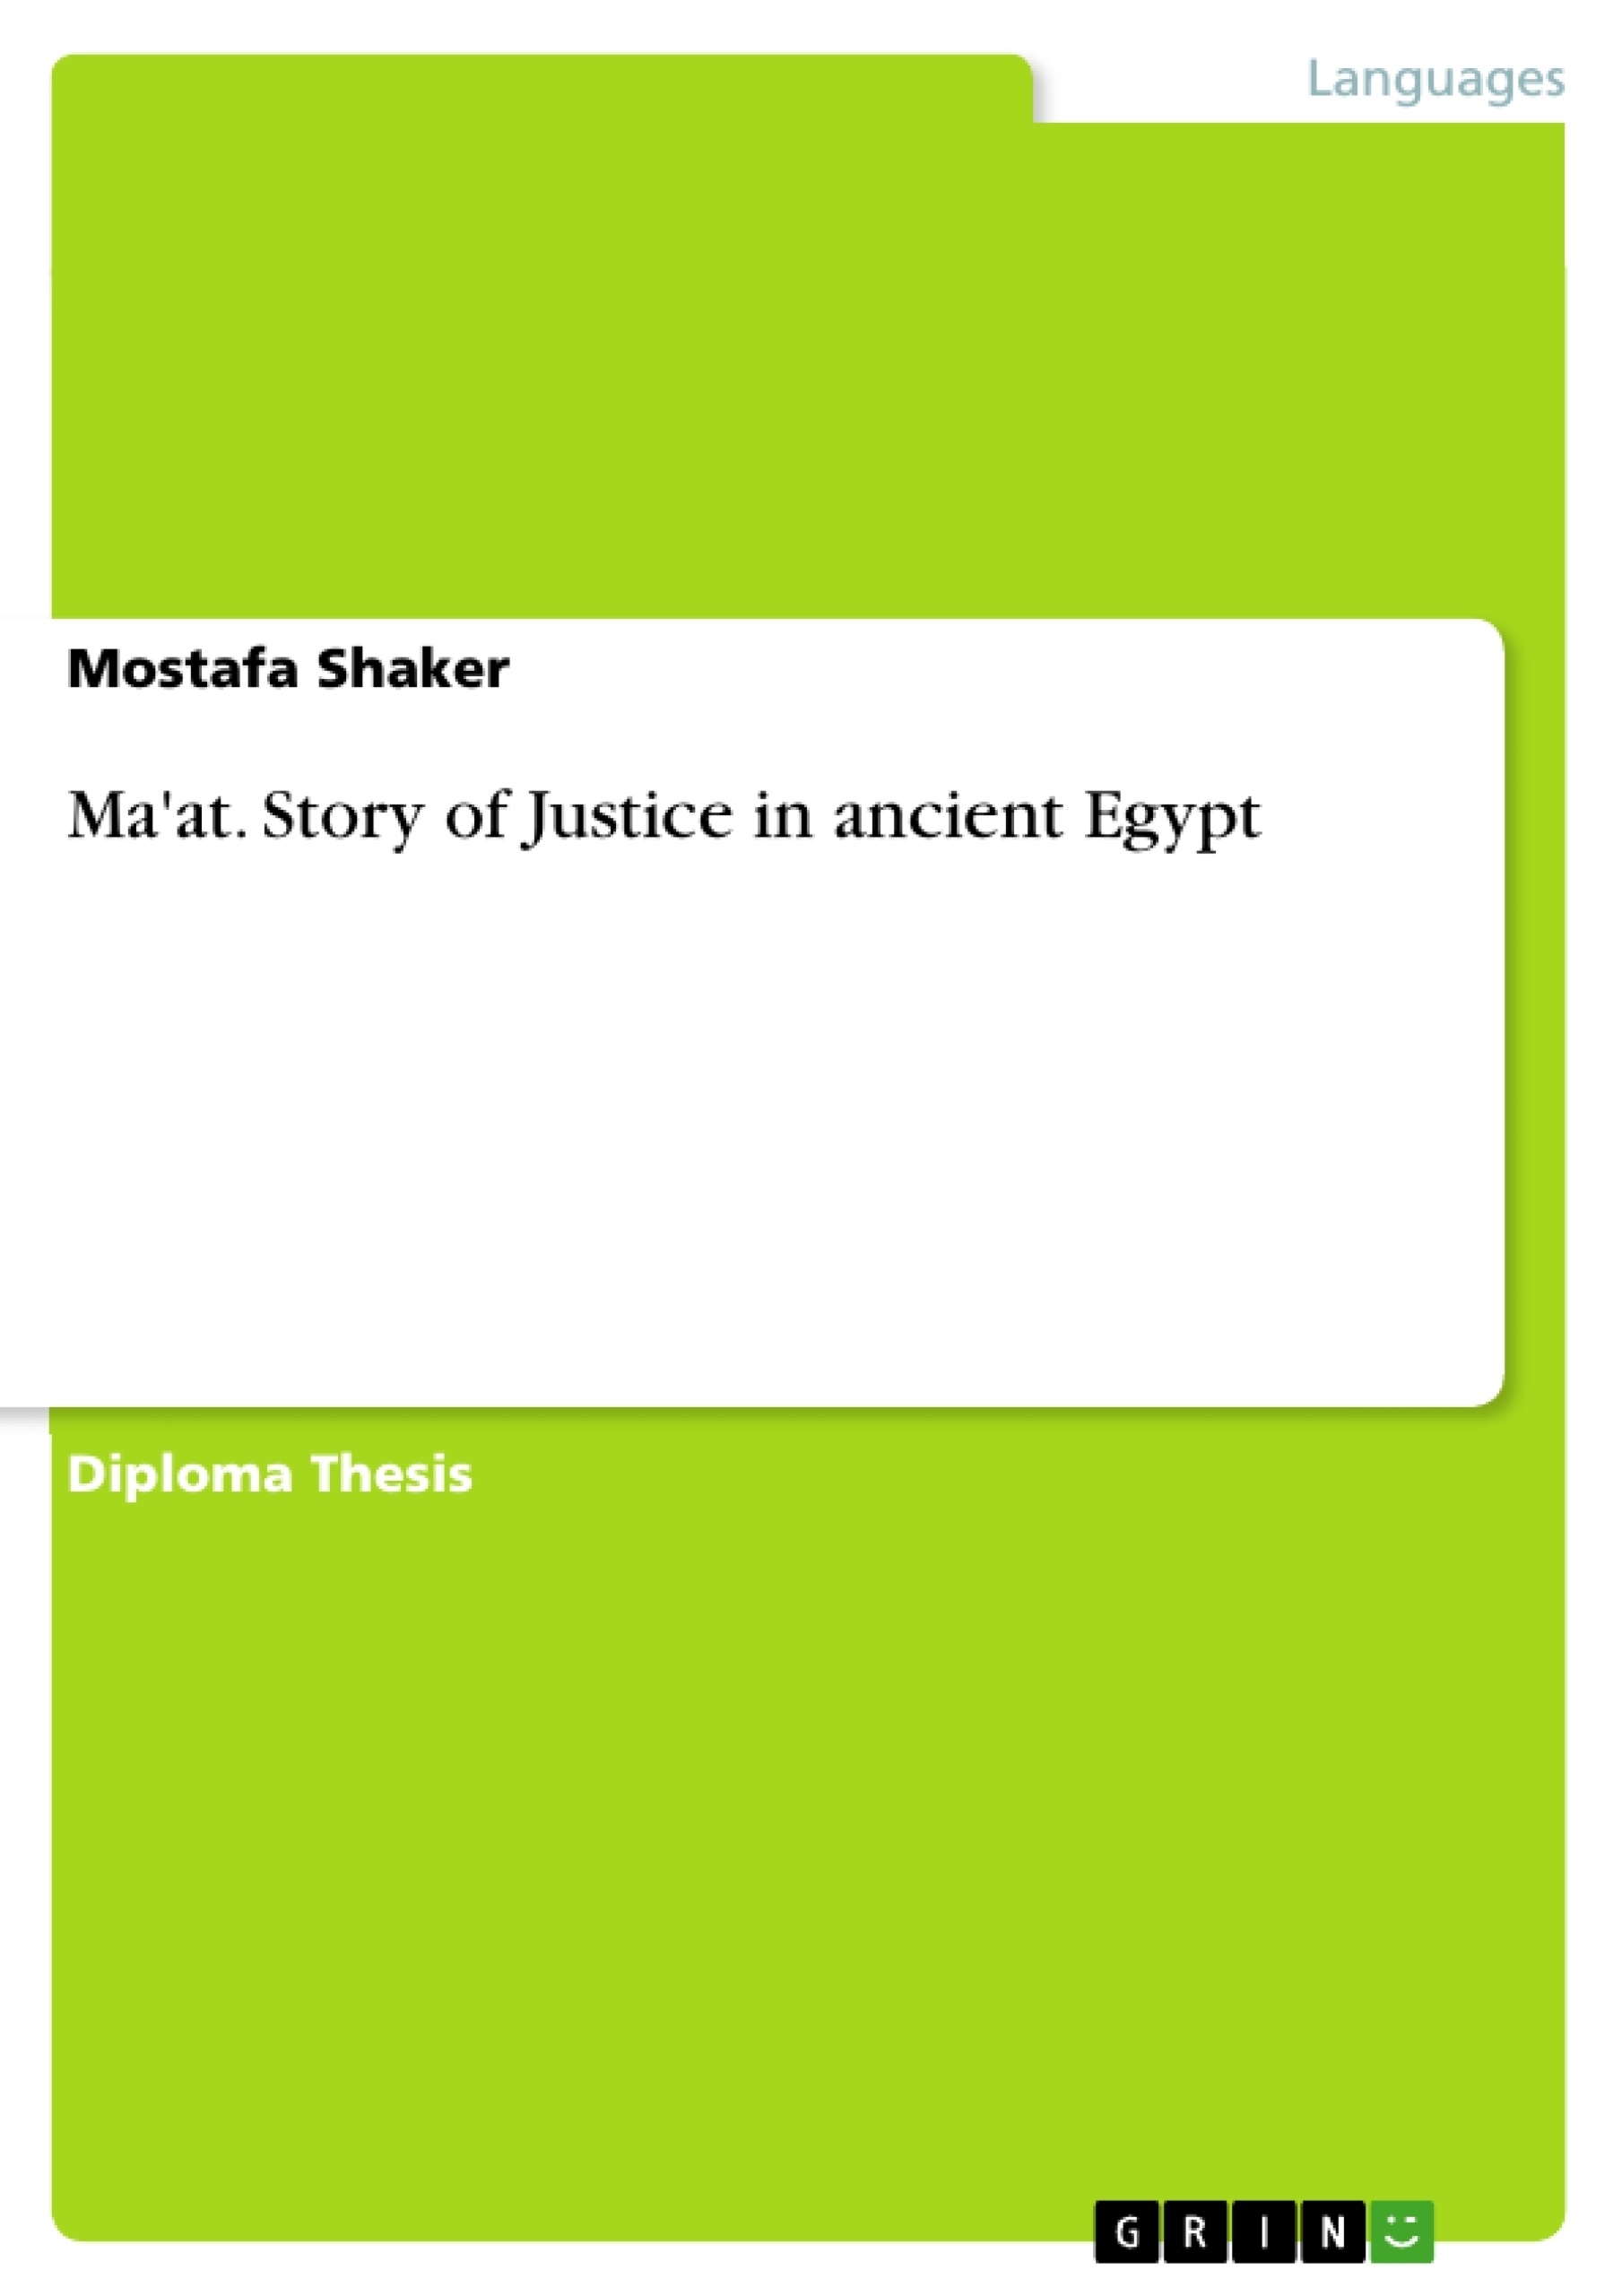 Título: Ma'at. Story of Justice in ancient Egypt